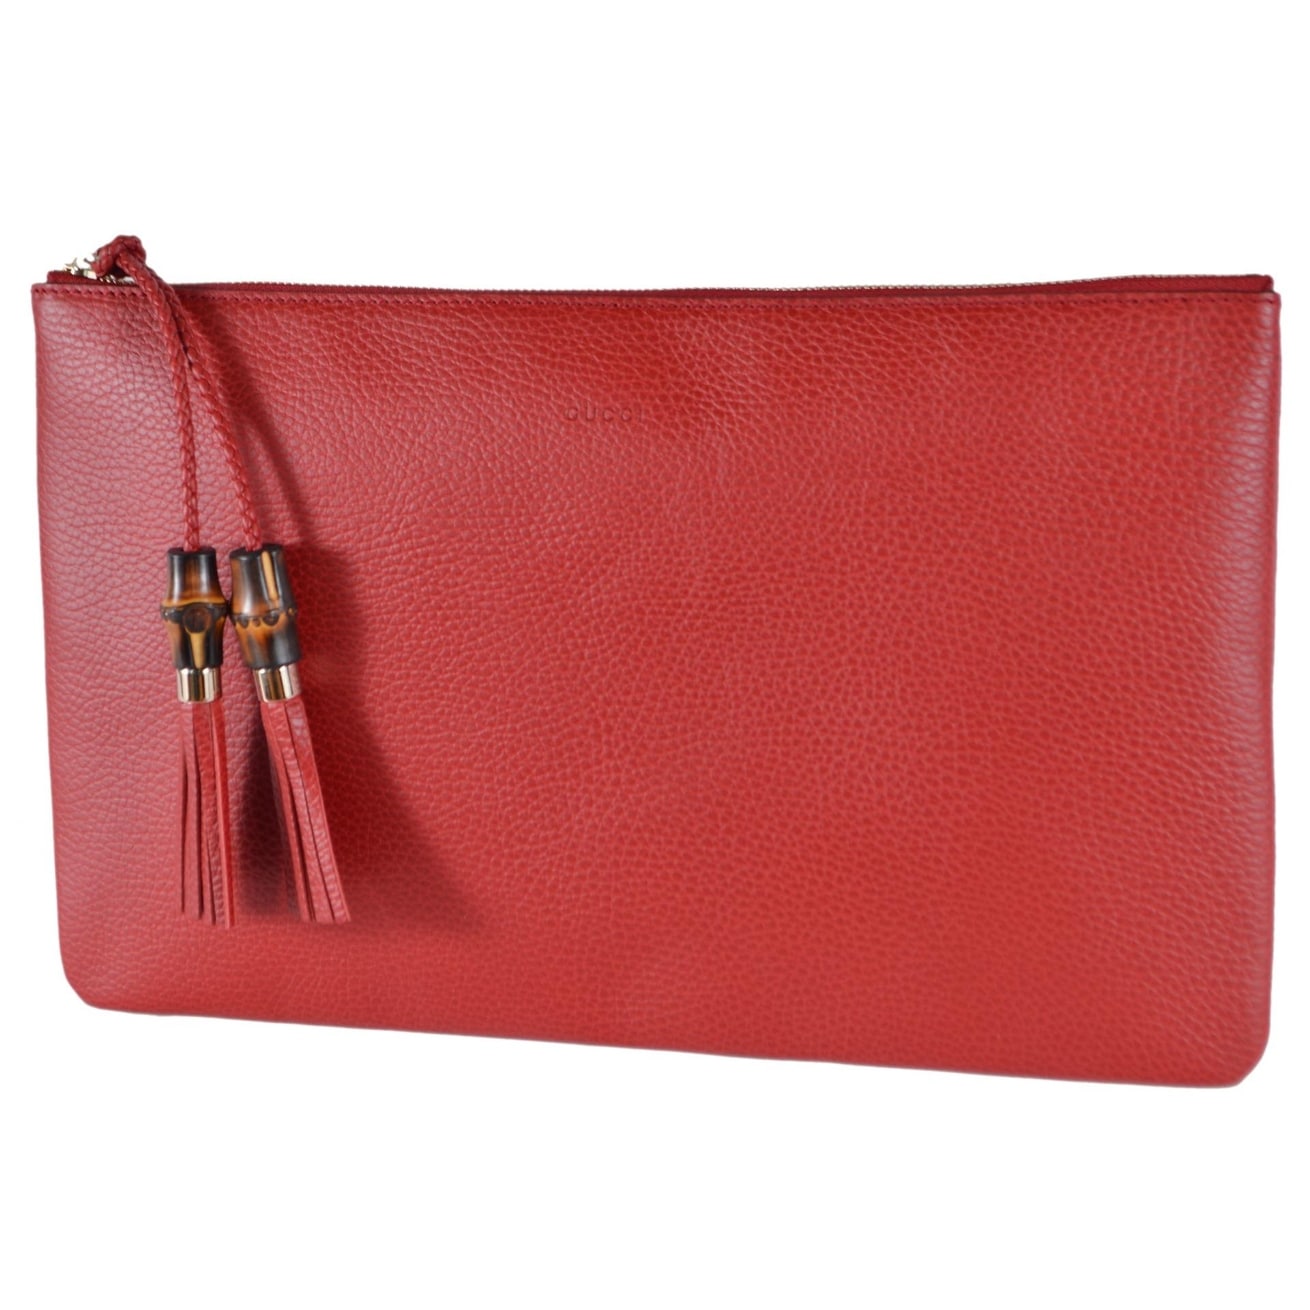 Gucci 449653 Red Leather Bamboo Tassel 